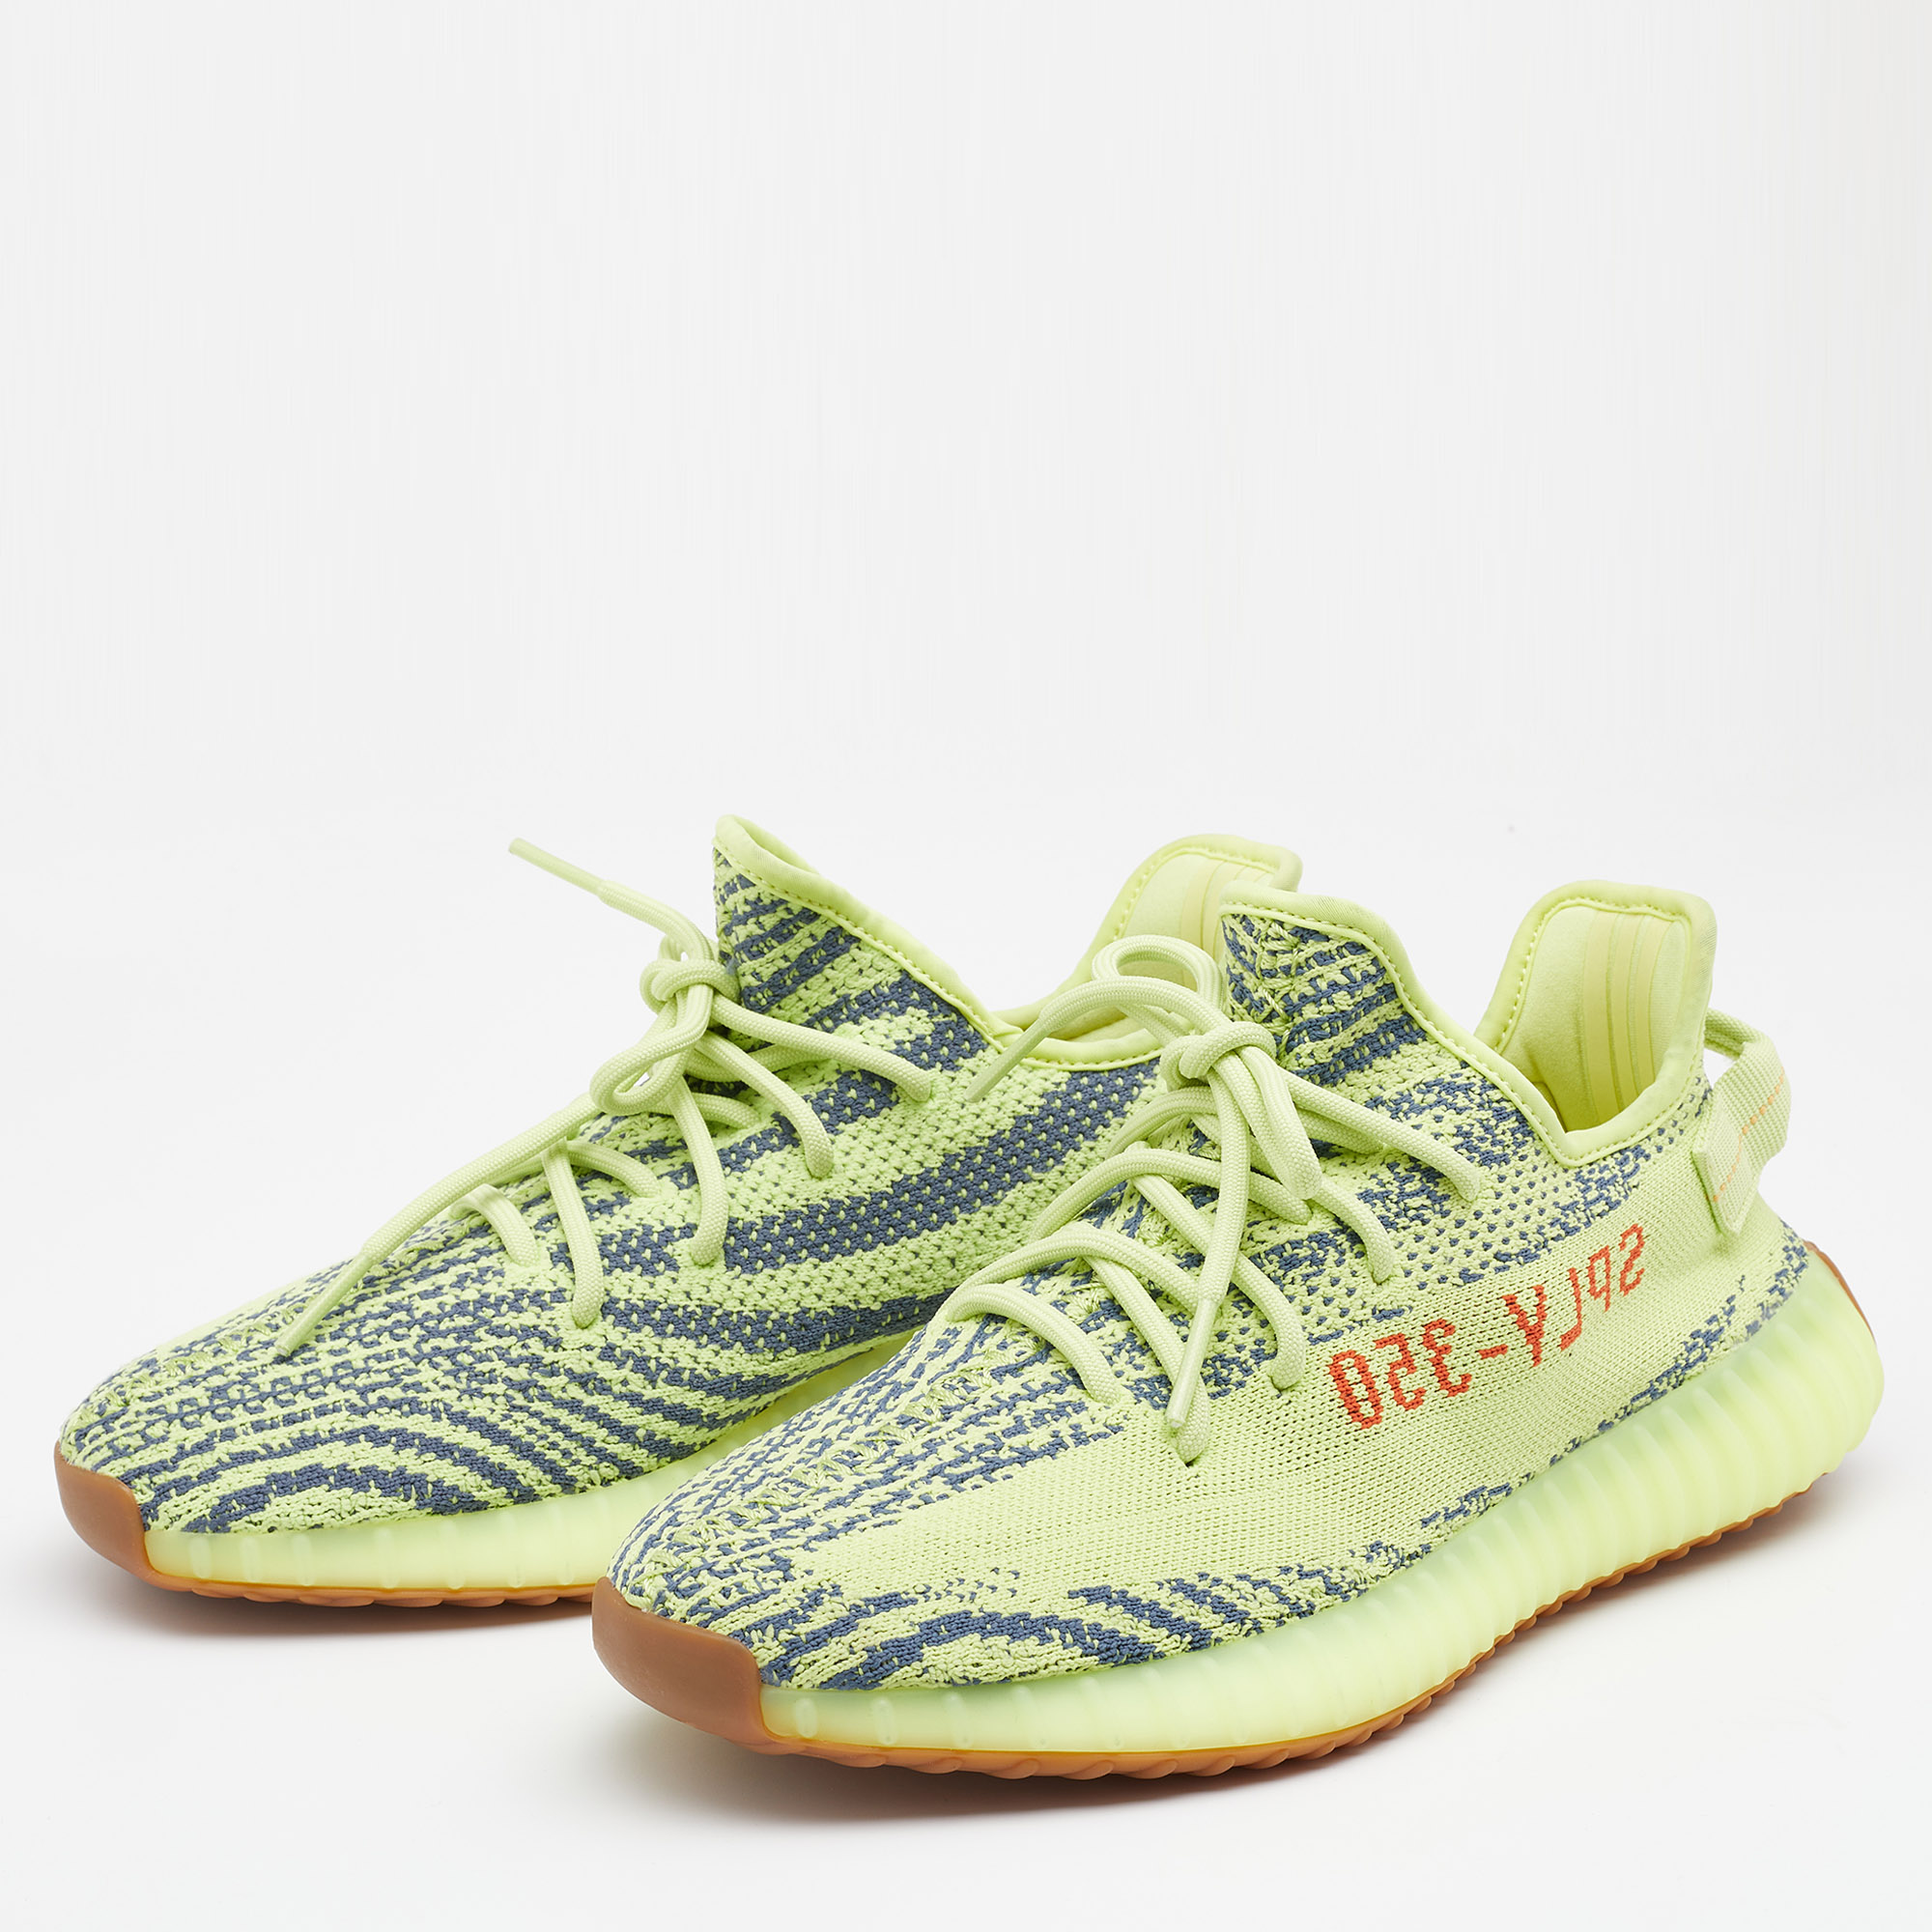 

Yeezy x Adidas Neon Yellow Knit Fabric Semi Frozen Boost 350 V2 Sneakers Size  1/3